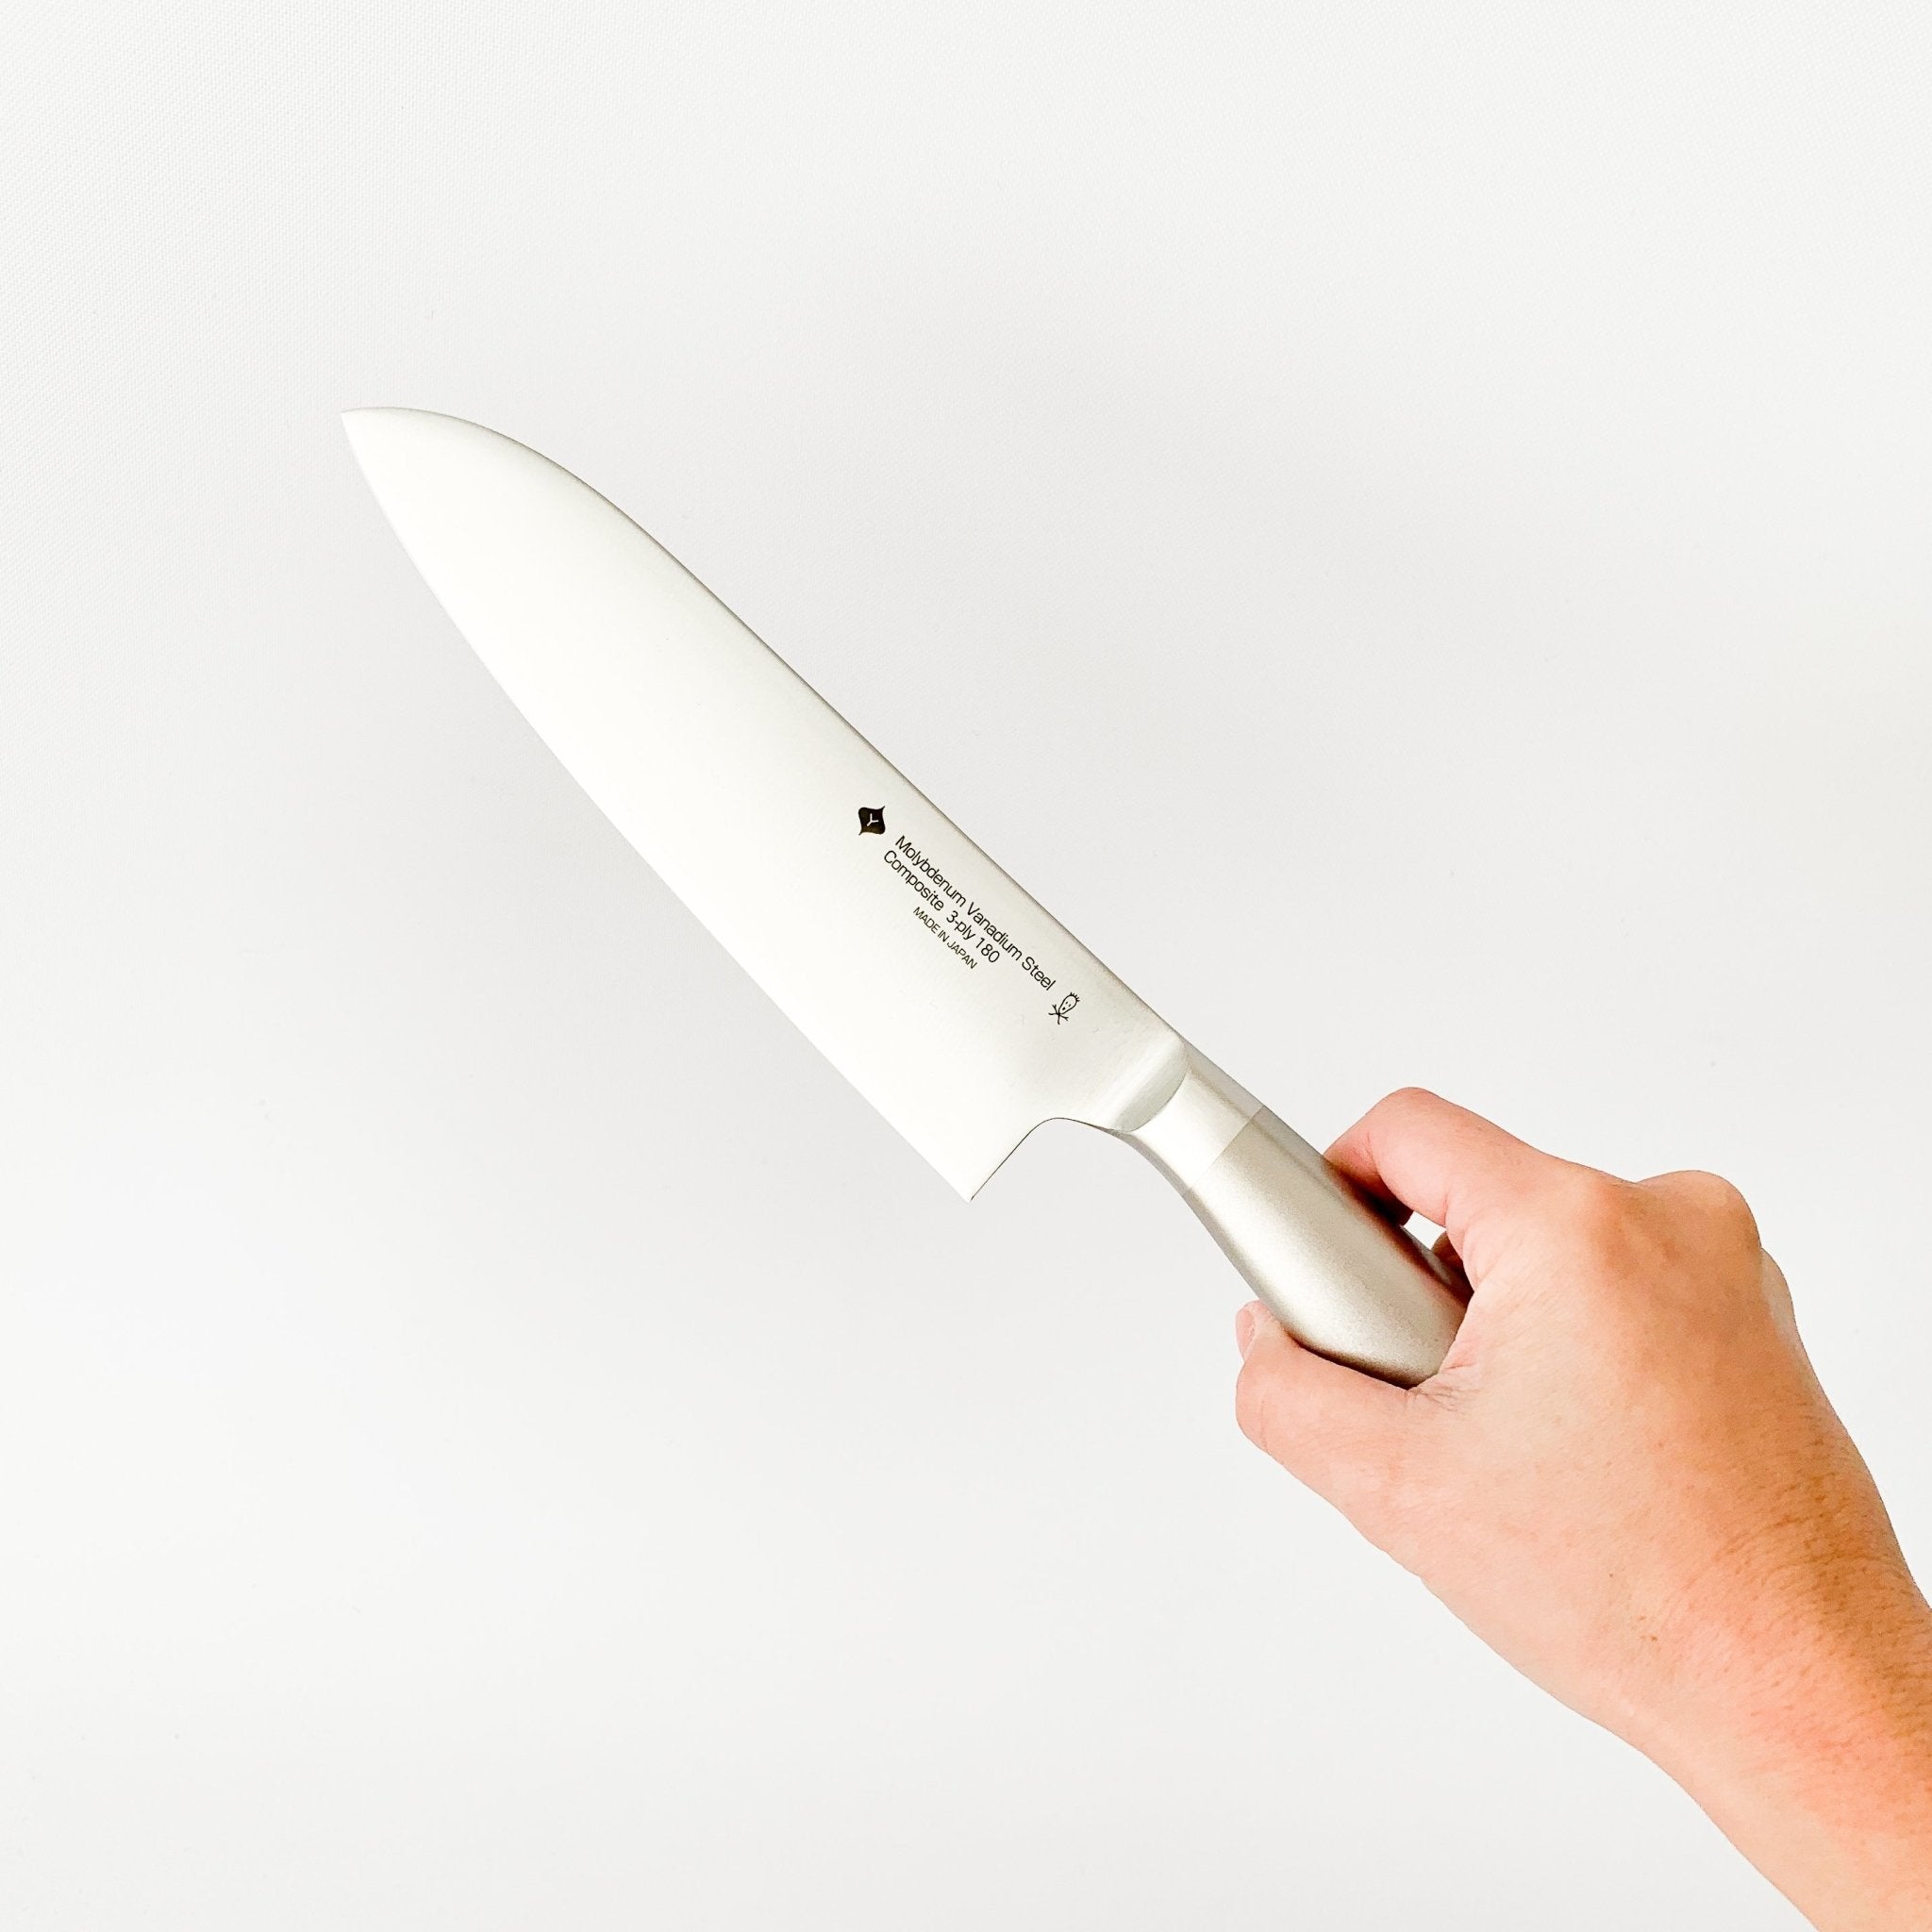 Stainless Steel Kitchen Utility Knives